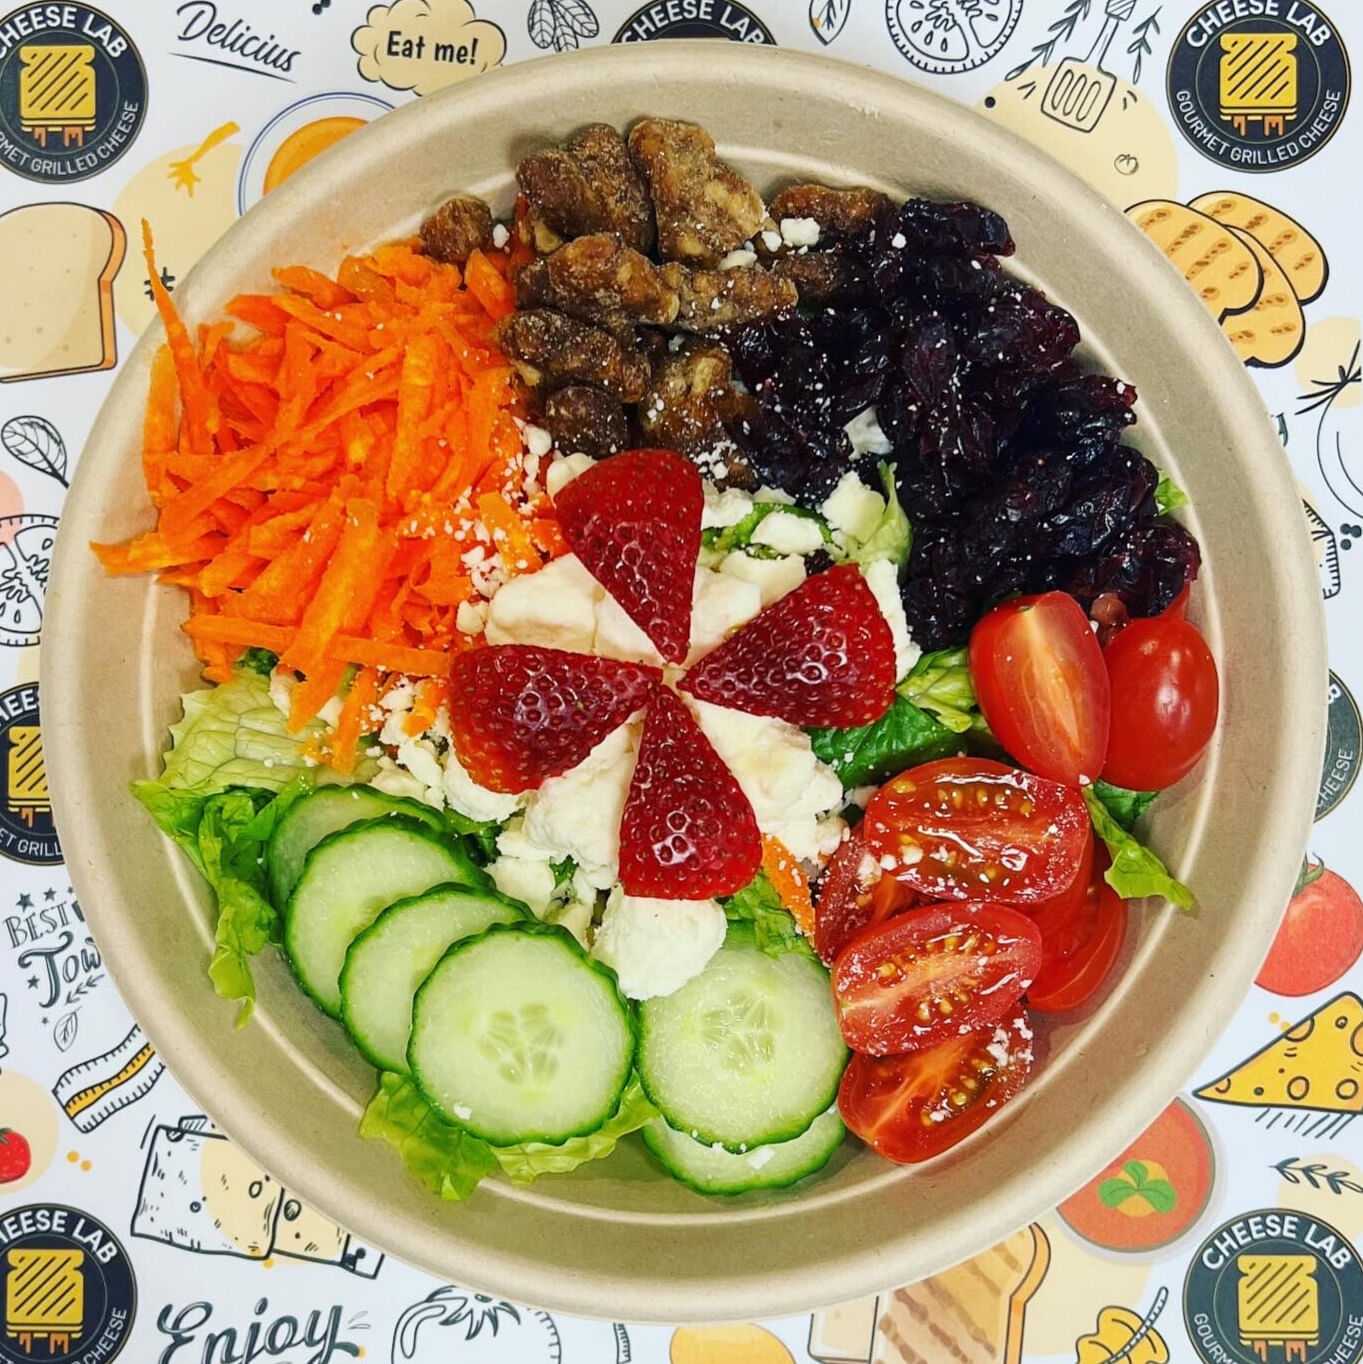 Healthy salad with fruits, vegetables, nuts, and cheese in a bowl.